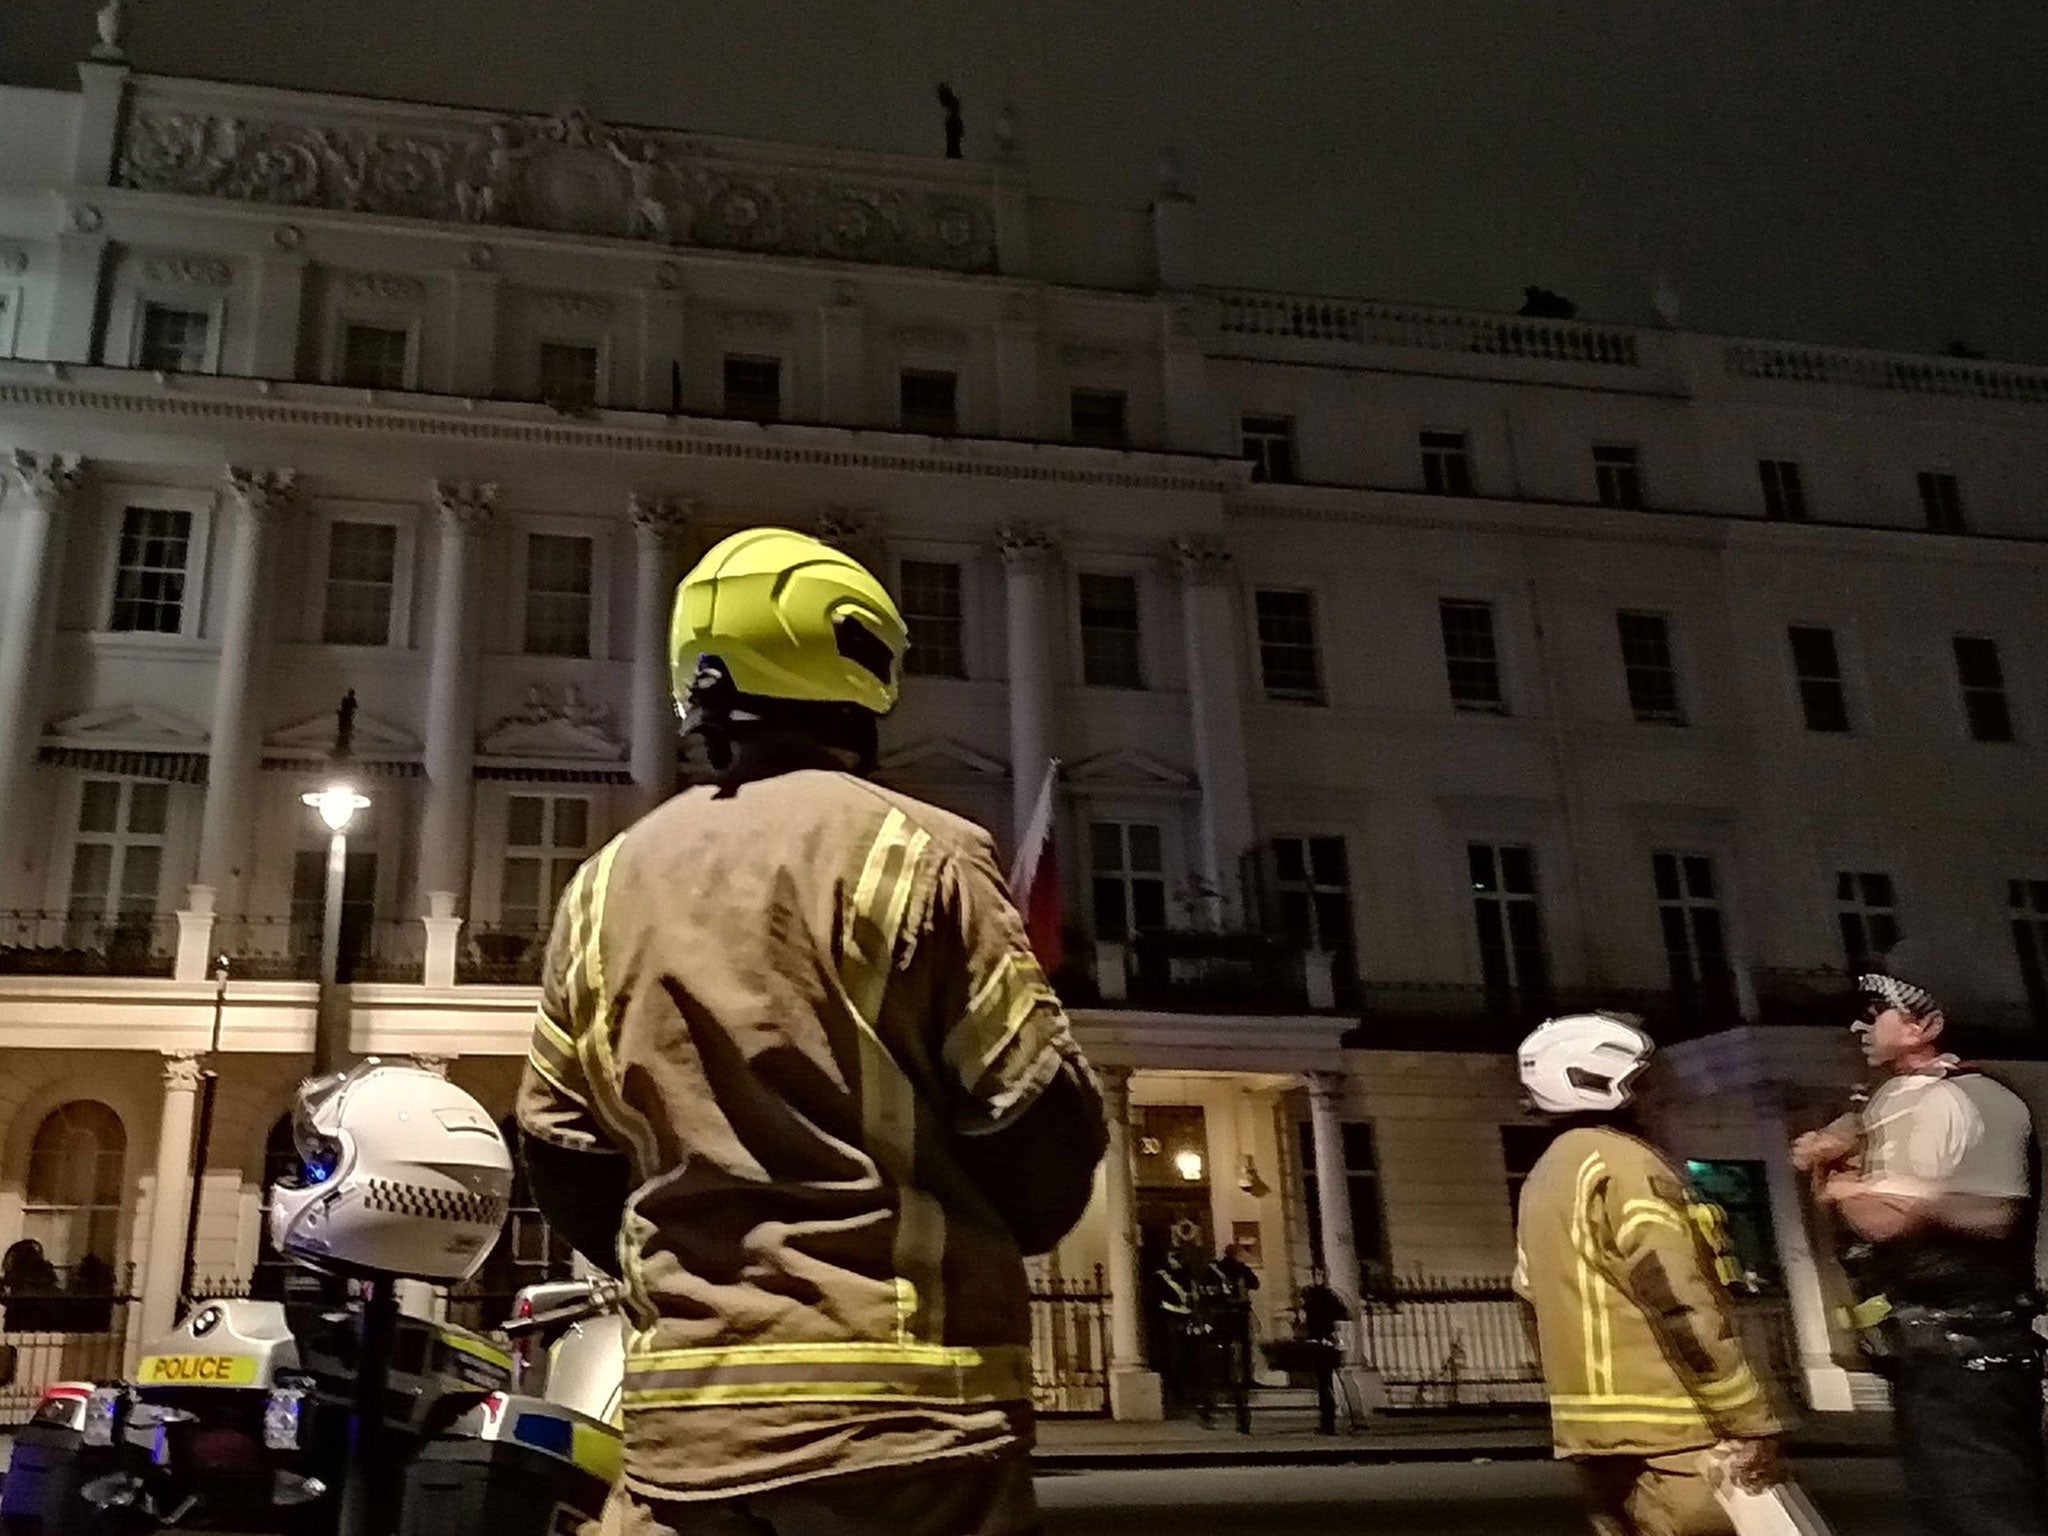 Firefighters and police outside the Bahrain embassy in London’s Belgrave Square as a man protests on the roof on 26 July